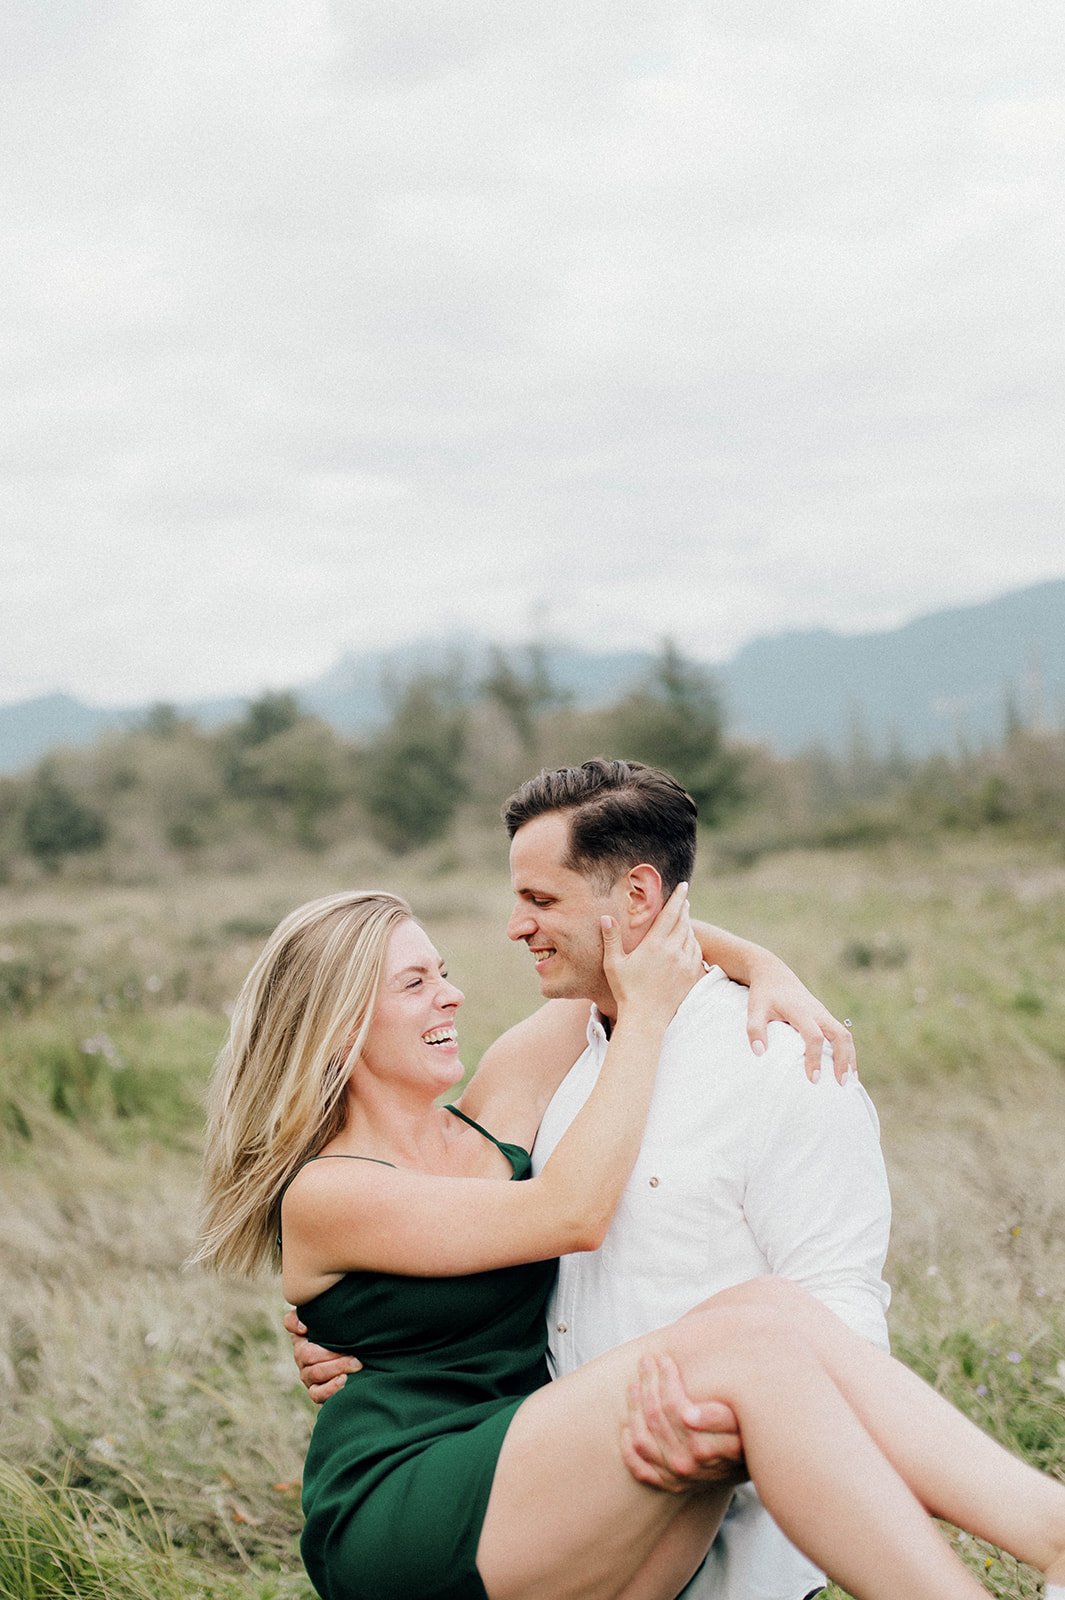 A man twirls around his fiancee in a grassy field in Squamish, BC.